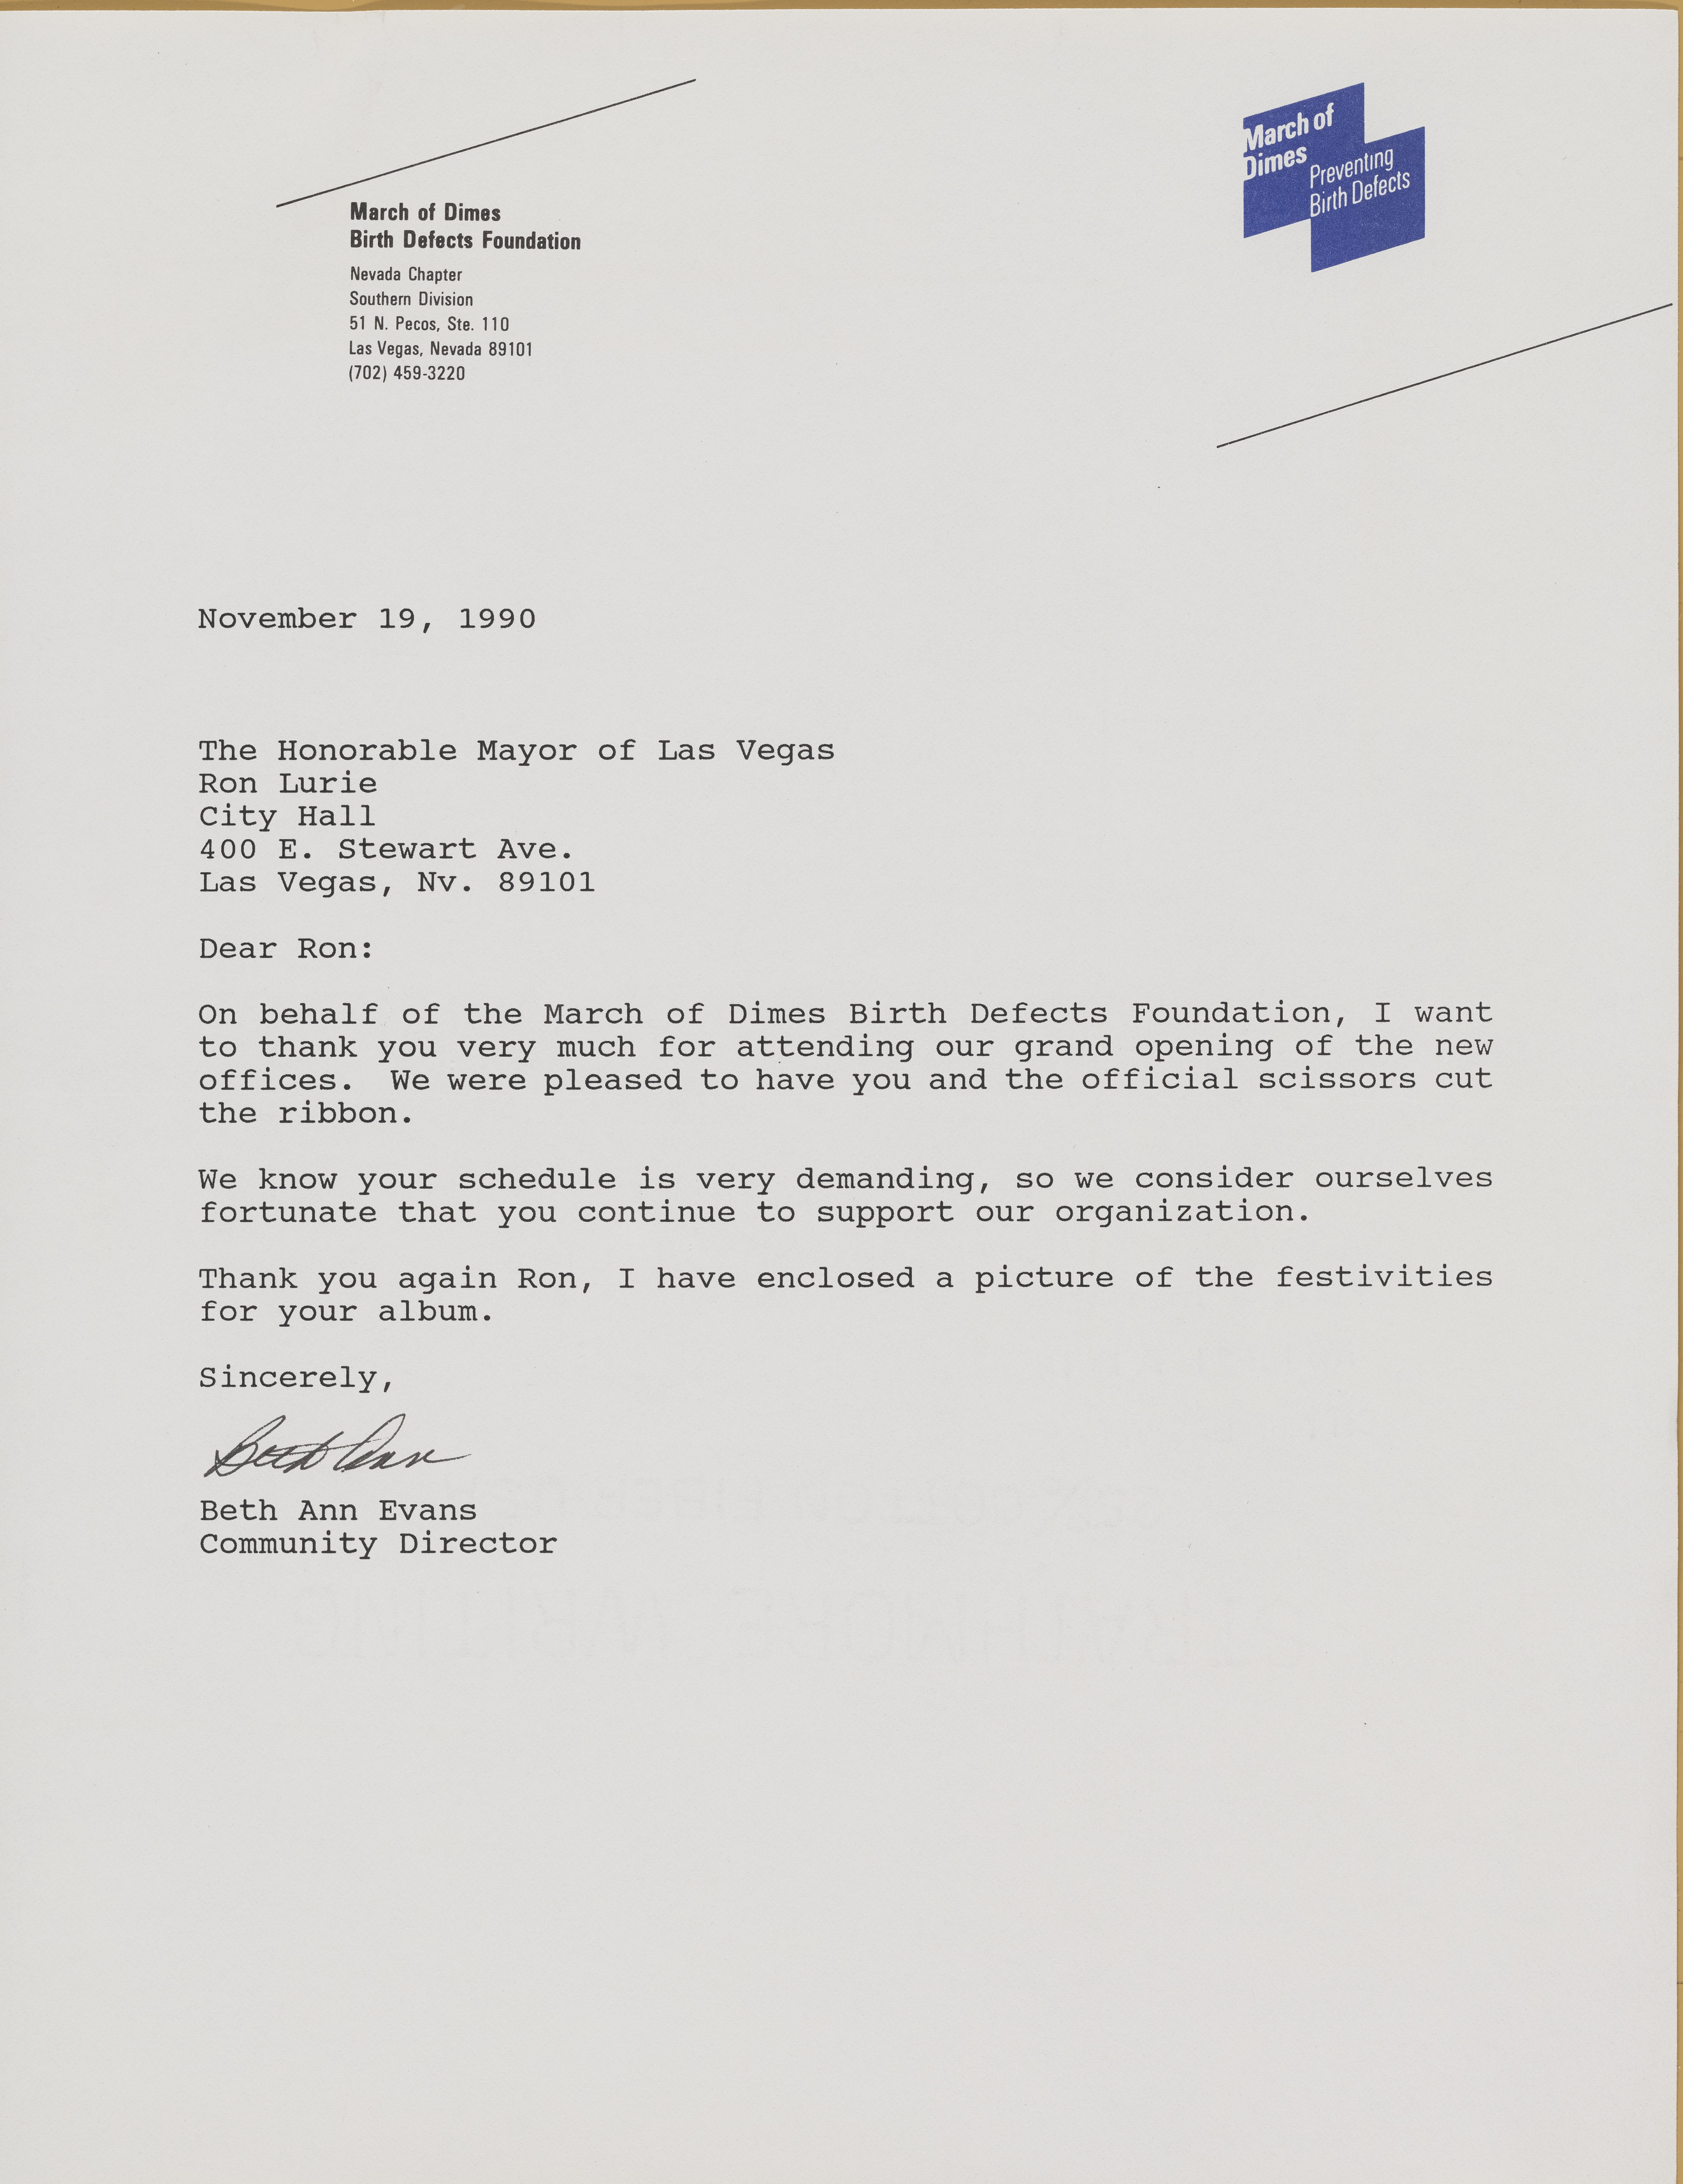 Letter from Beth Ann Evans (Las Vegas Nev., March of Dimes) to Ron Lurie, November 19, 1990